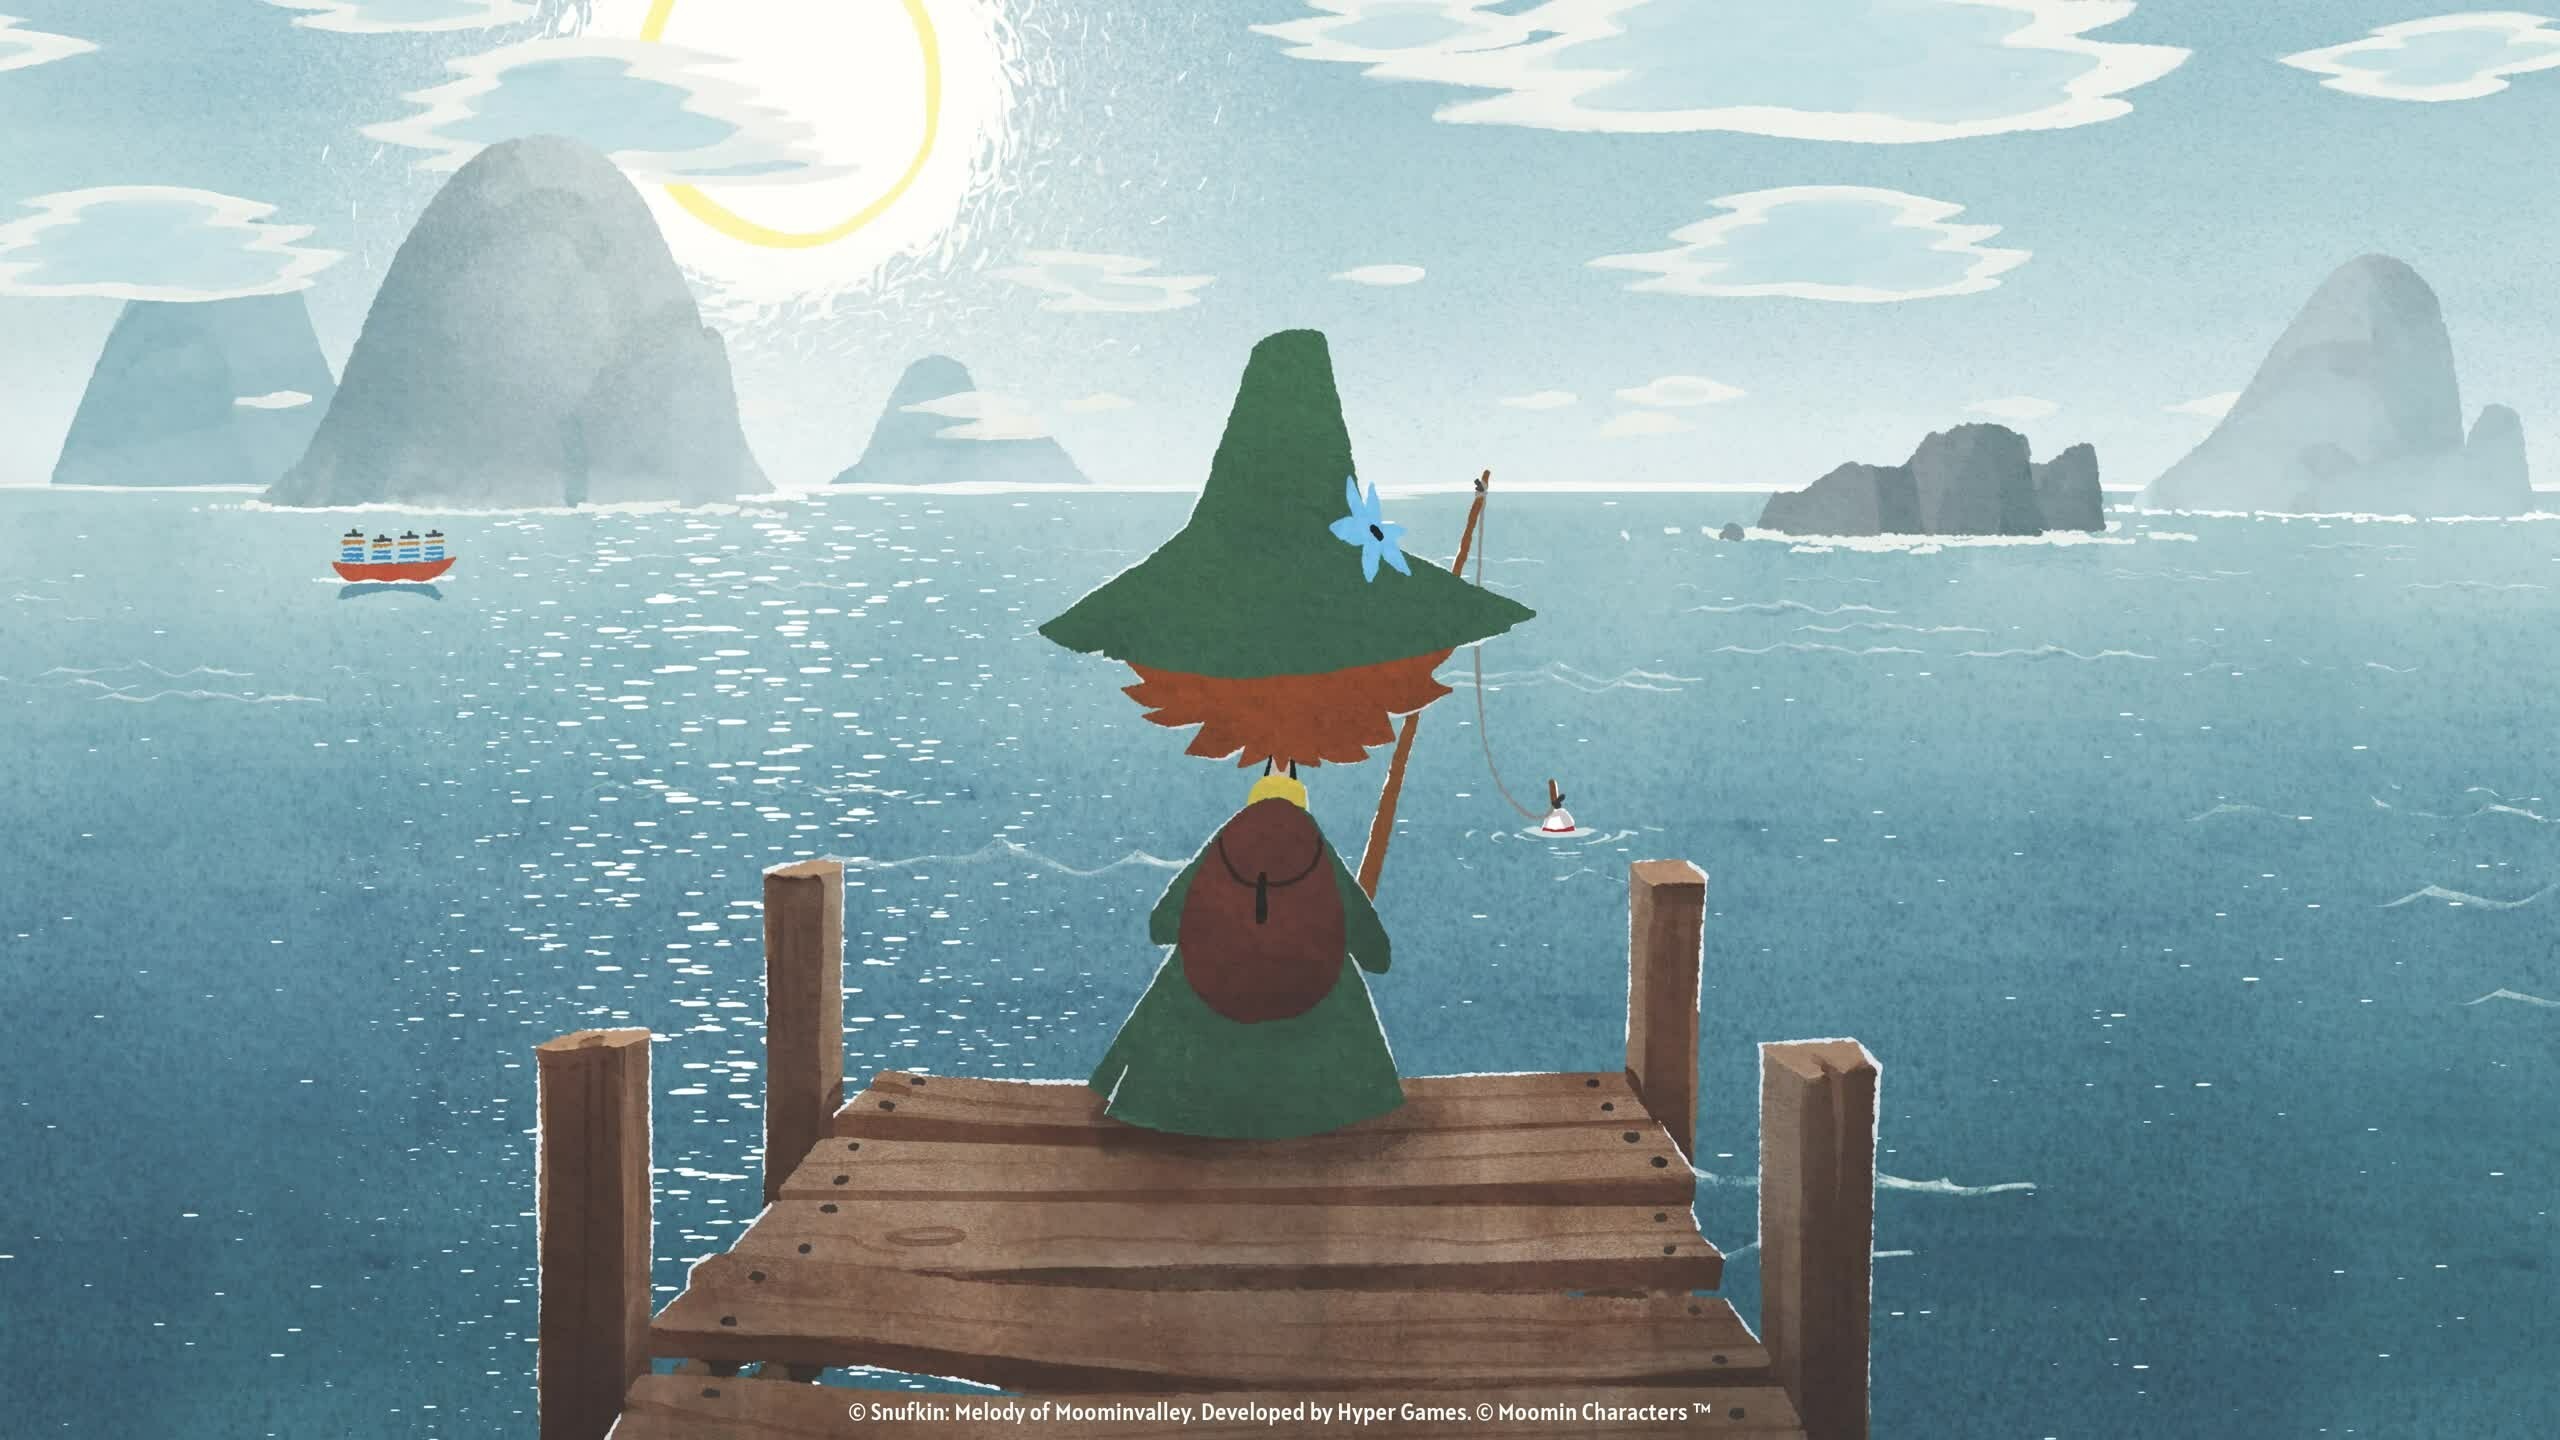 Snufkin: Melody of Moominvalley. Developed by Hyper Games. Moomin Characters